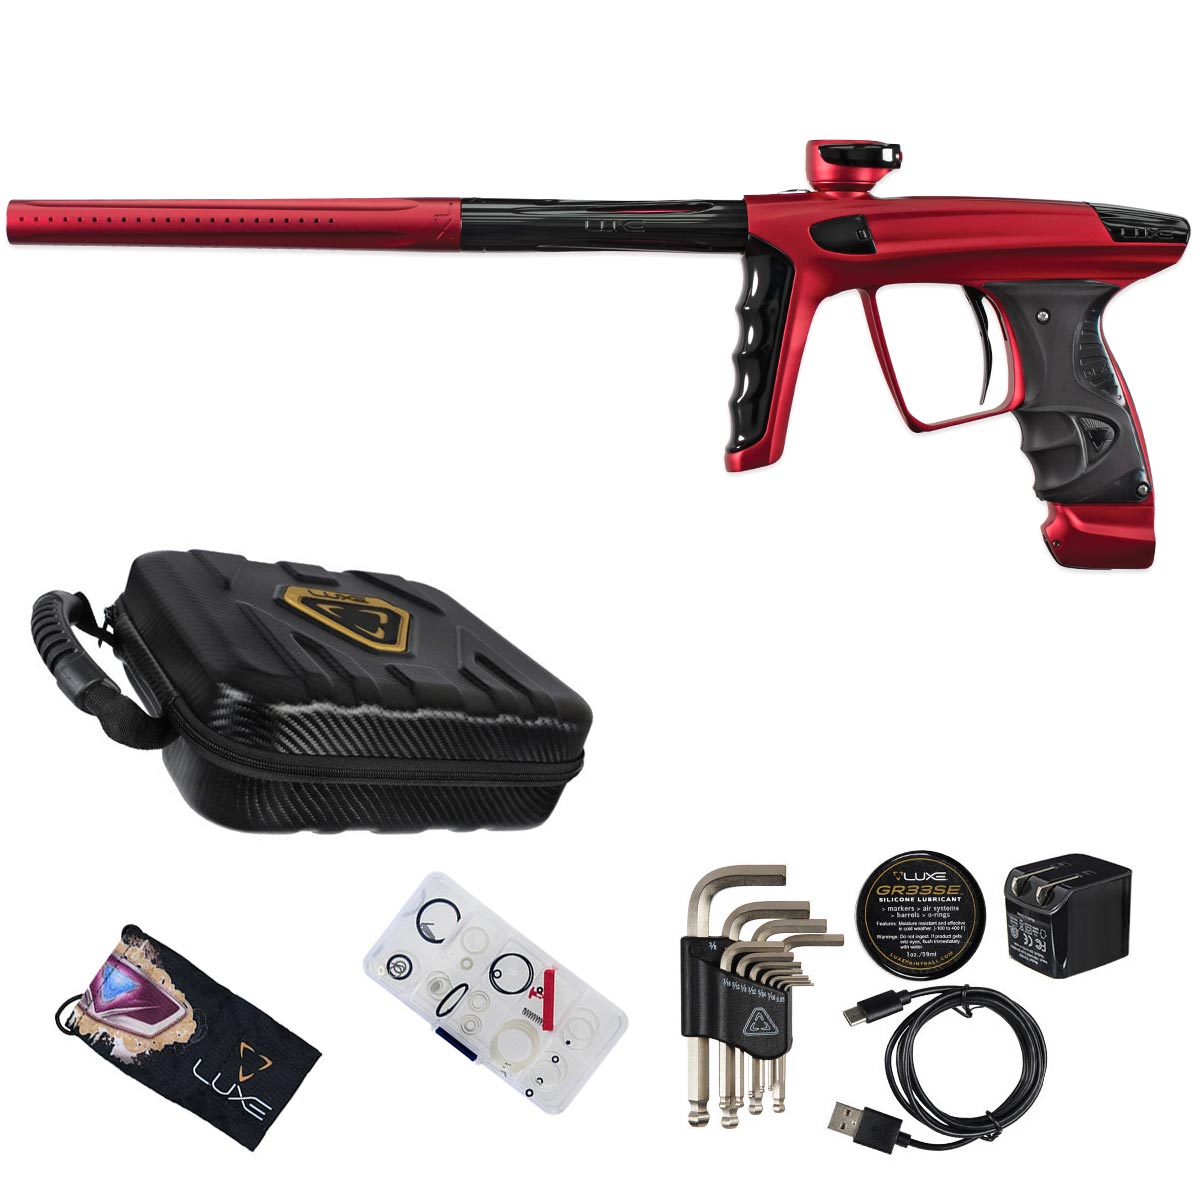 DLX Luxe X Paintball Gun - Polished Red / Polished Black